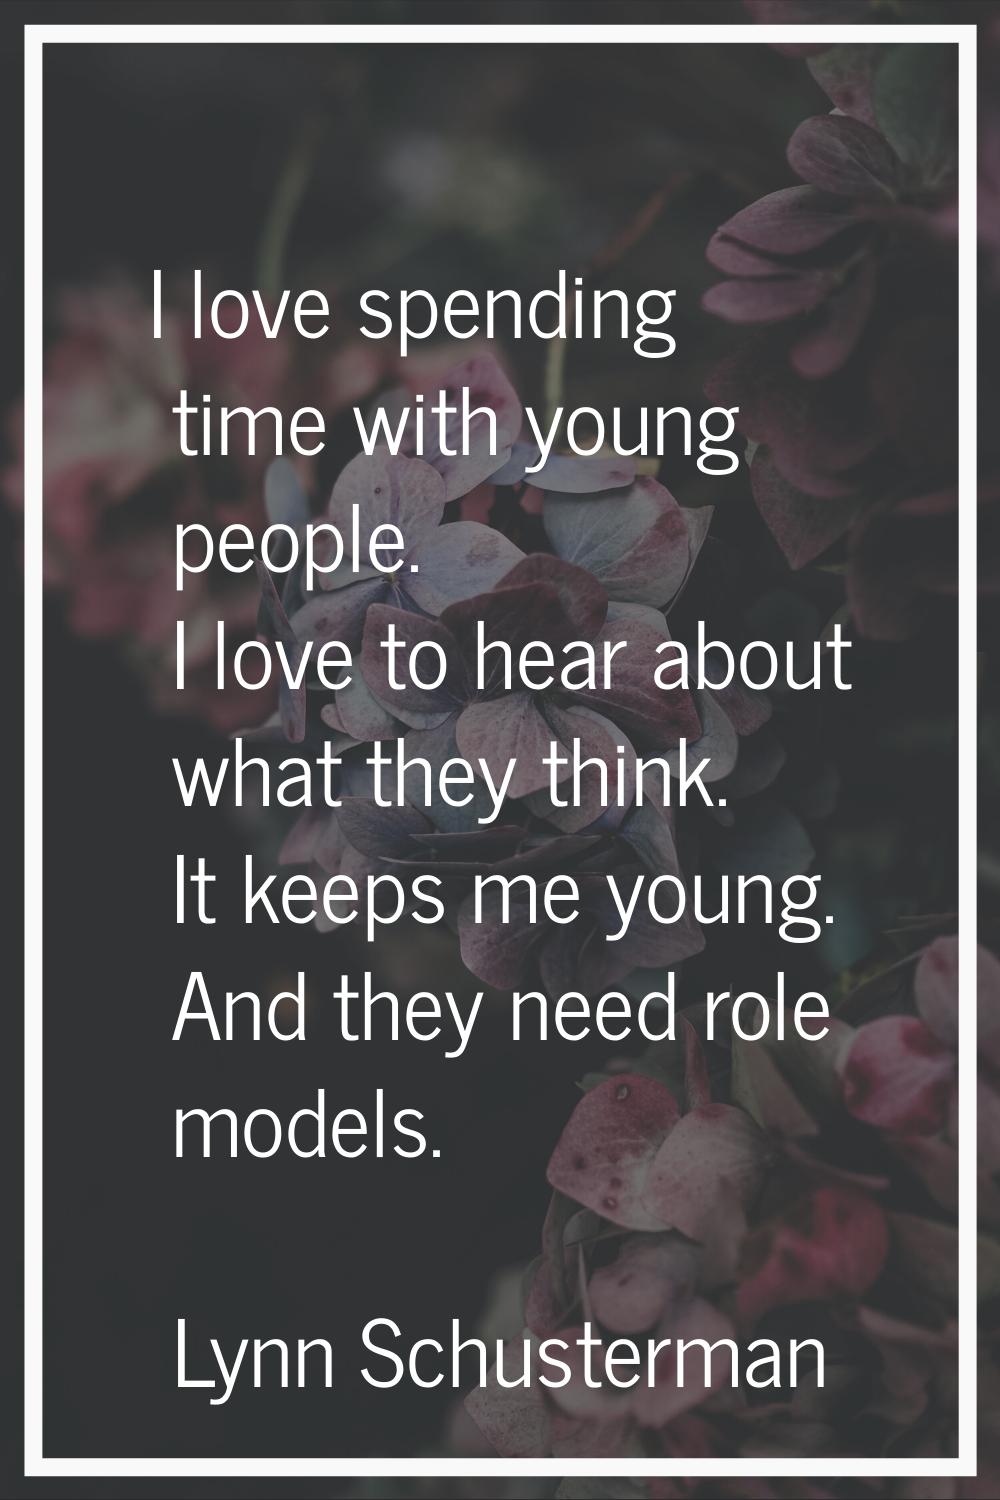 I love spending time with young people. I love to hear about what they think. It keeps me young. An